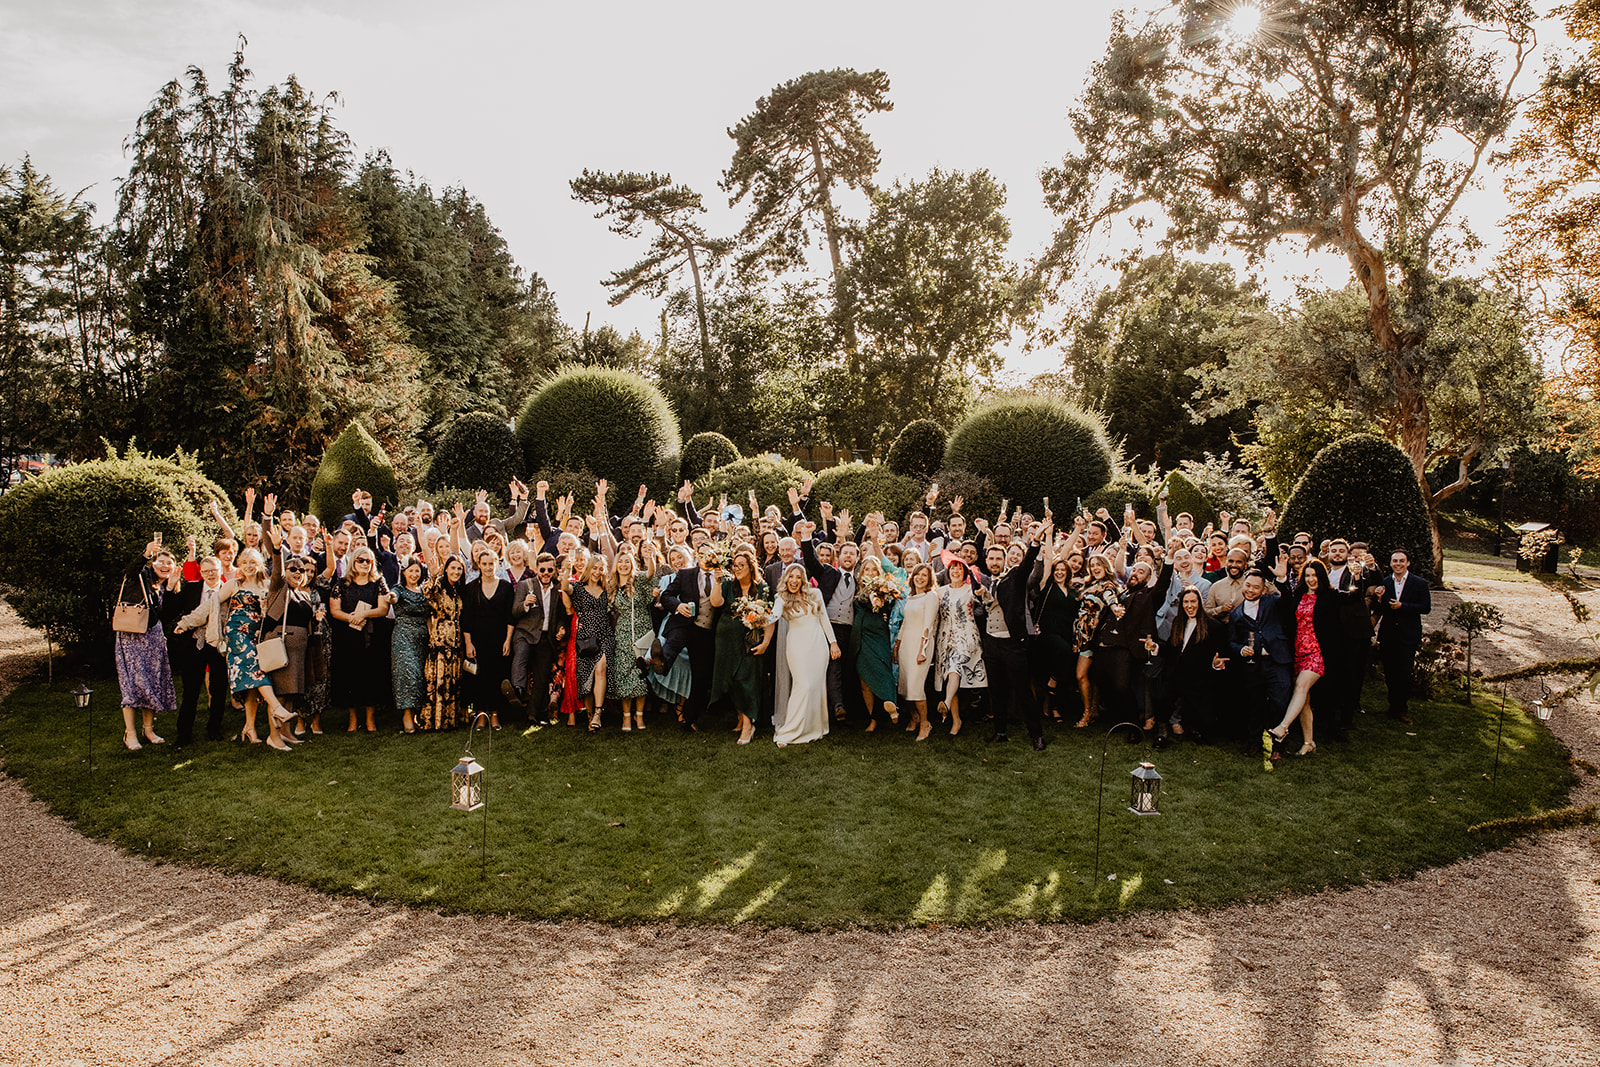 Wedding guests group shot at a Hampton Court House Wedding. By Olive Joy Photography